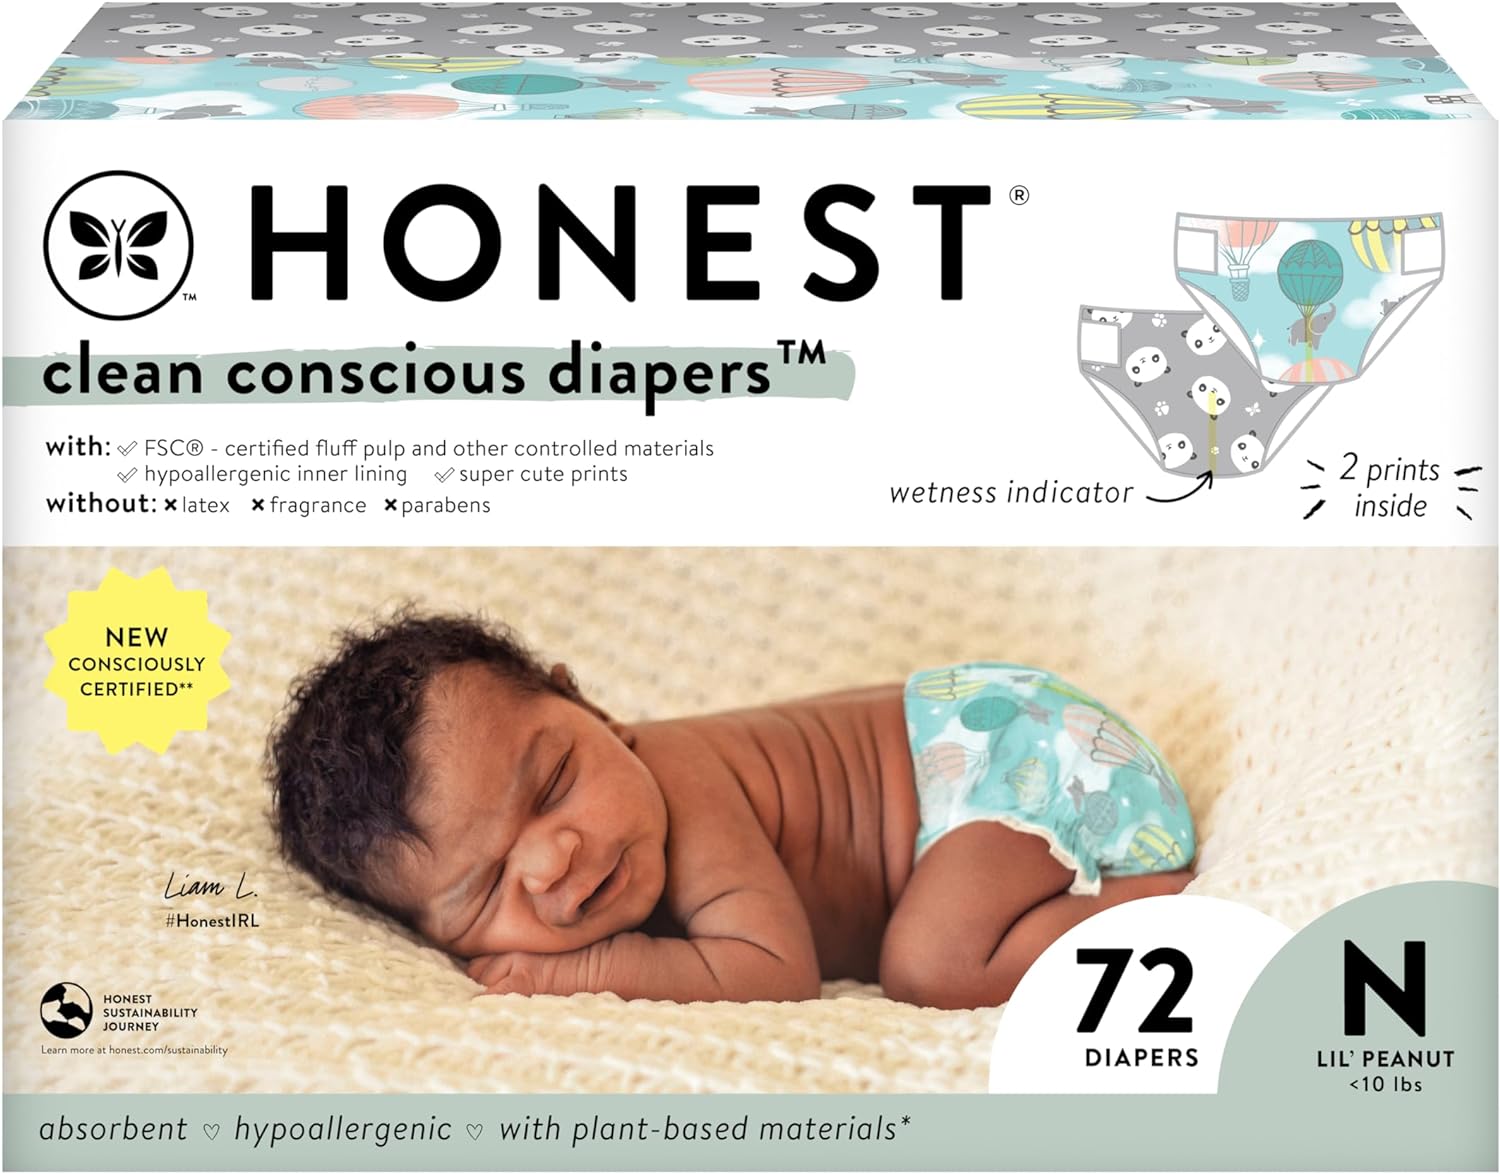 The Honest Company Clean Conscious Diapers